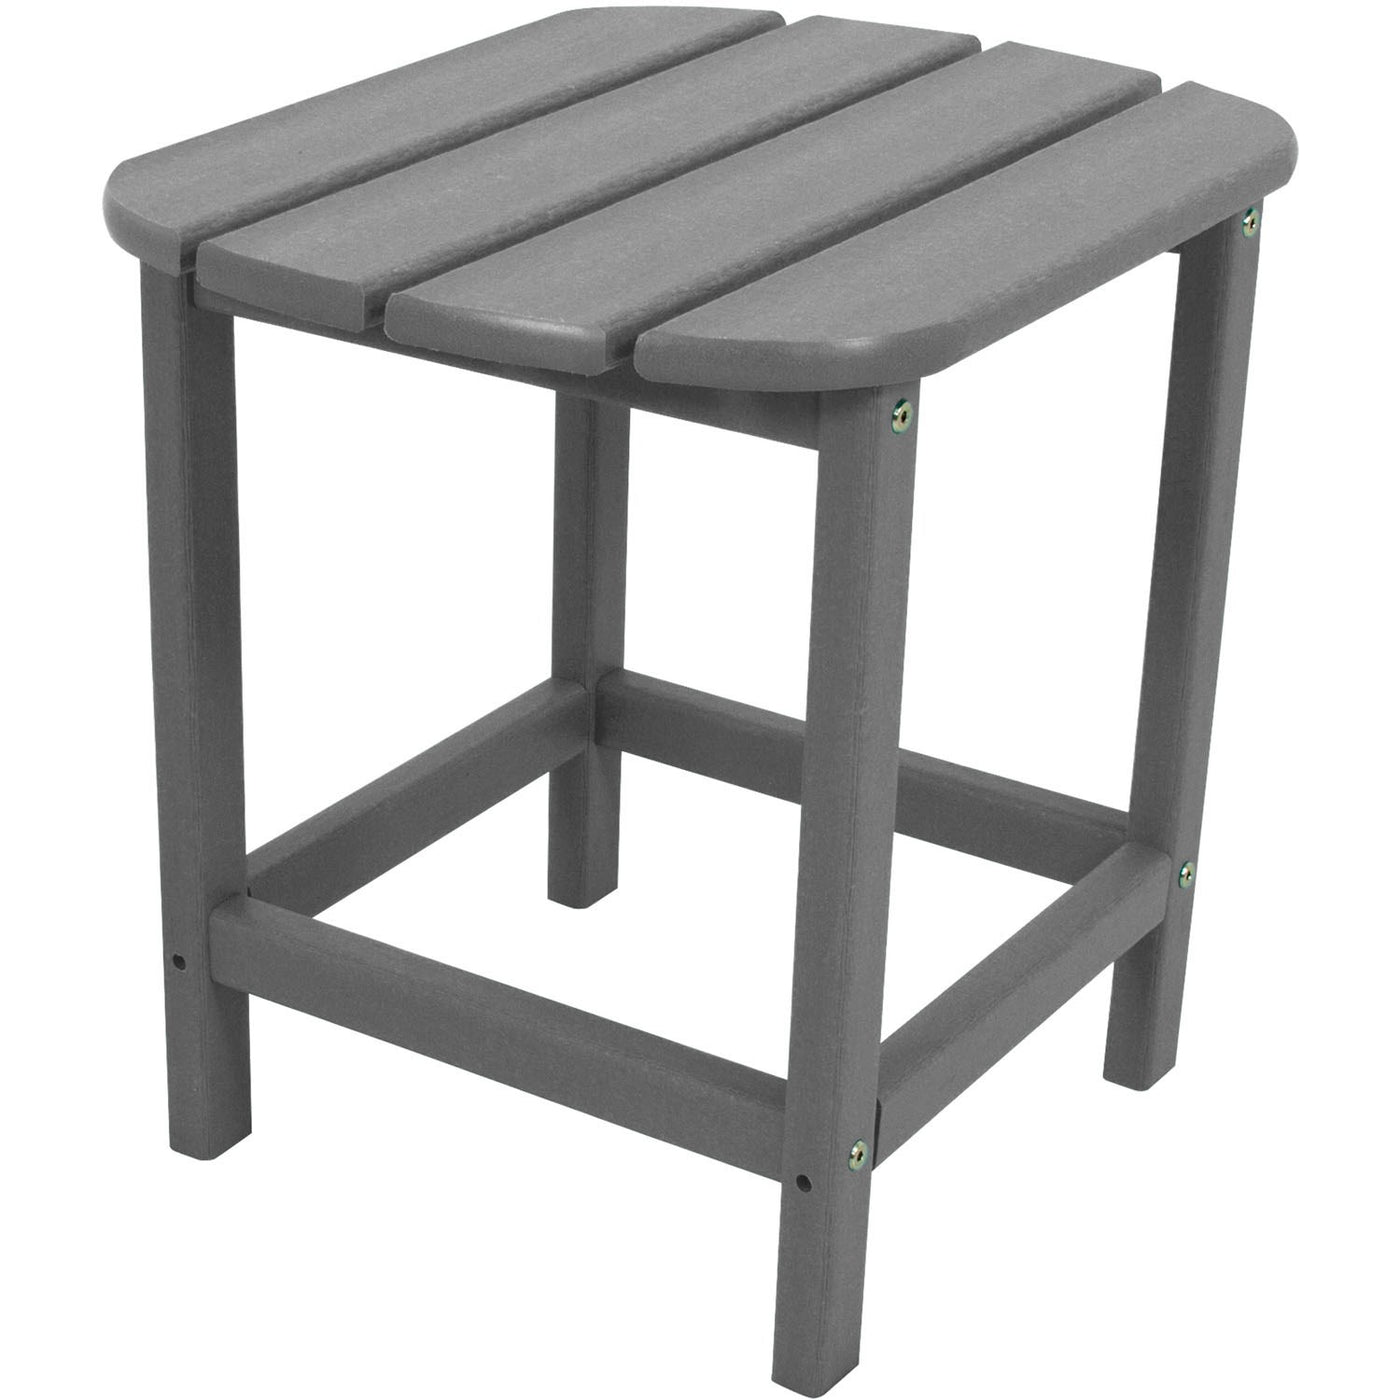 Hanover All-Weather 19"x15" Side Table - Slate Gray - GreenLivingSupply-Store